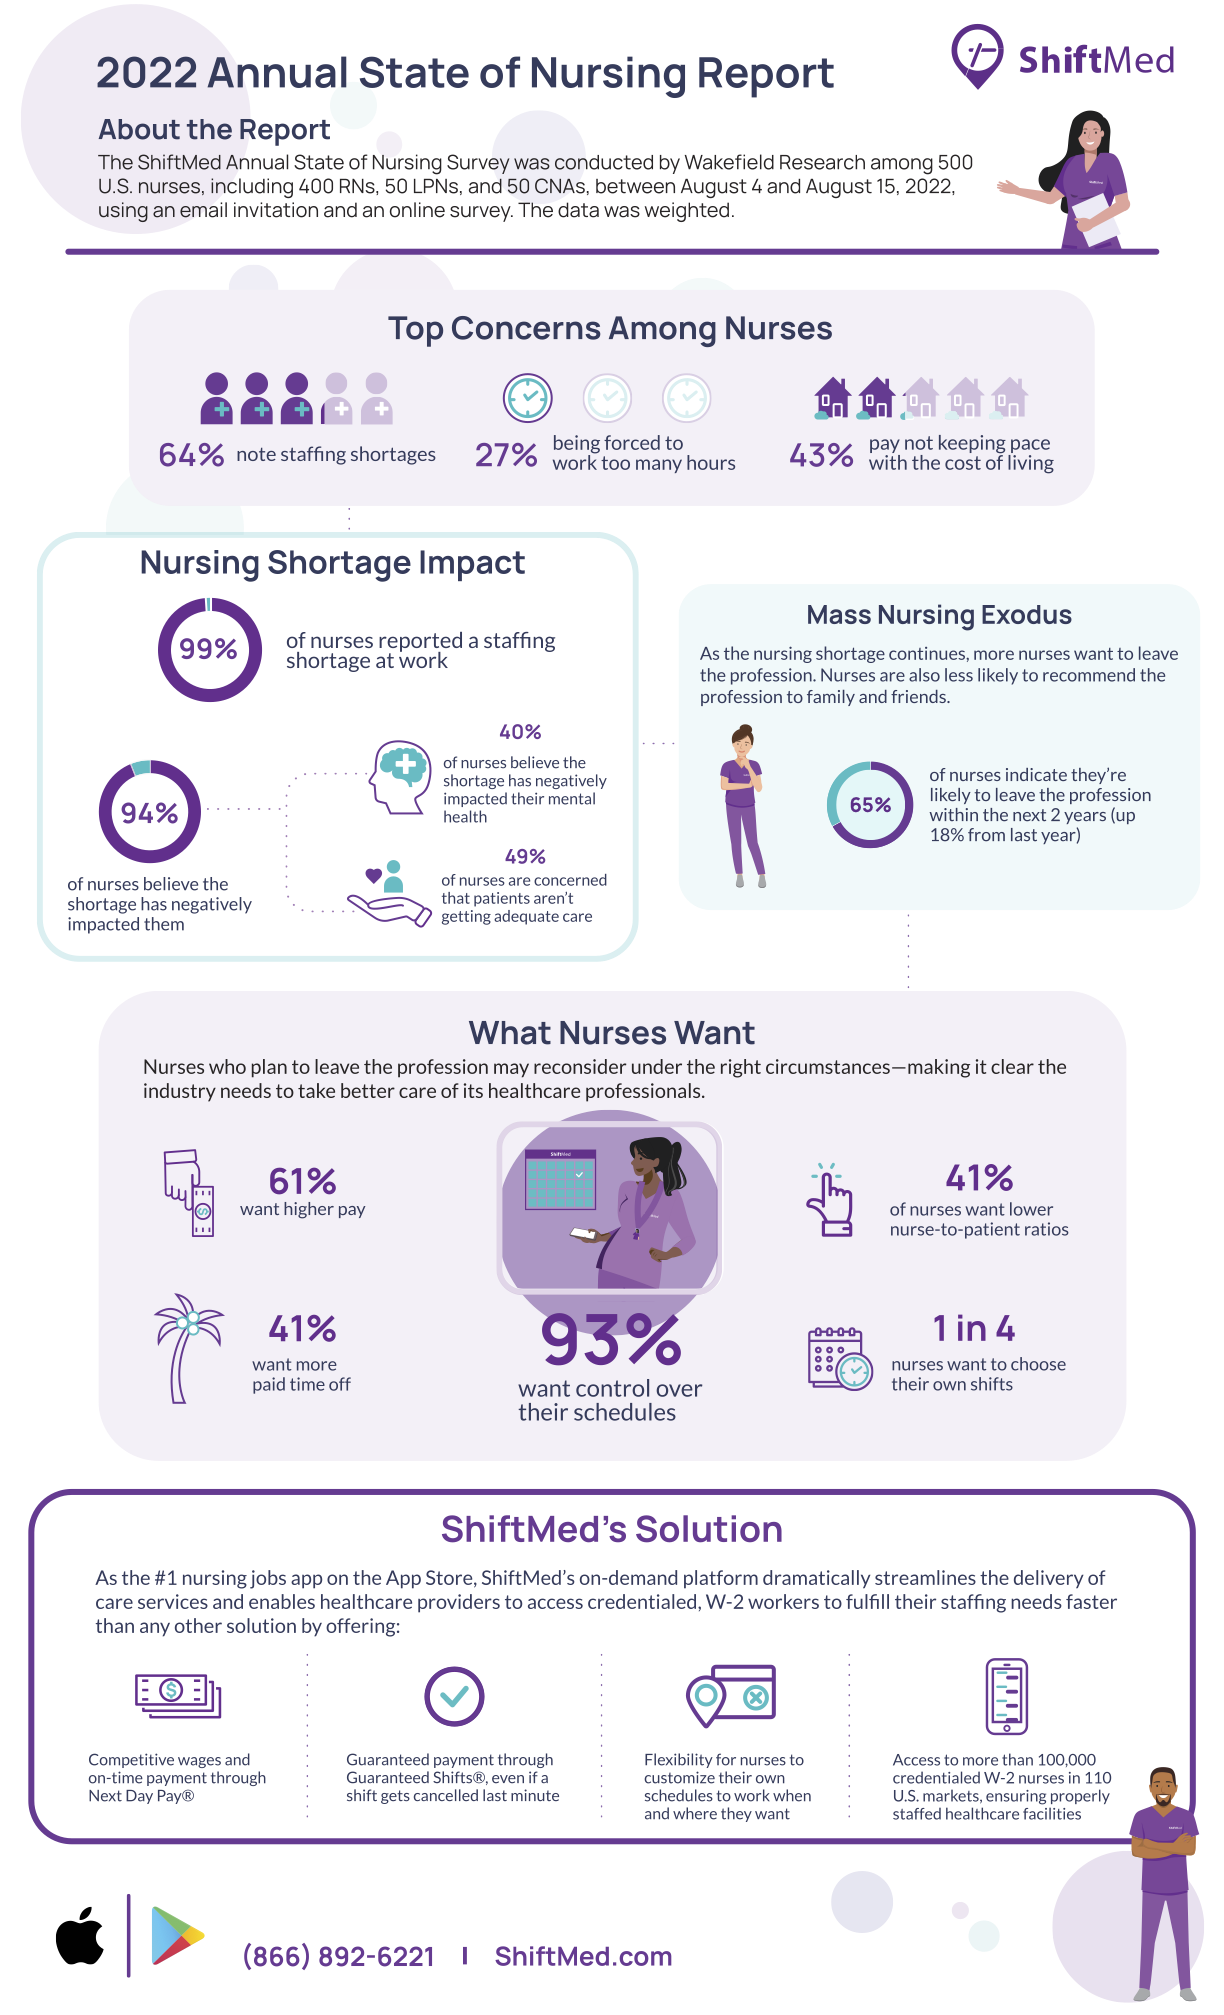 ShiftMed Annual State of Nursing Report 2022